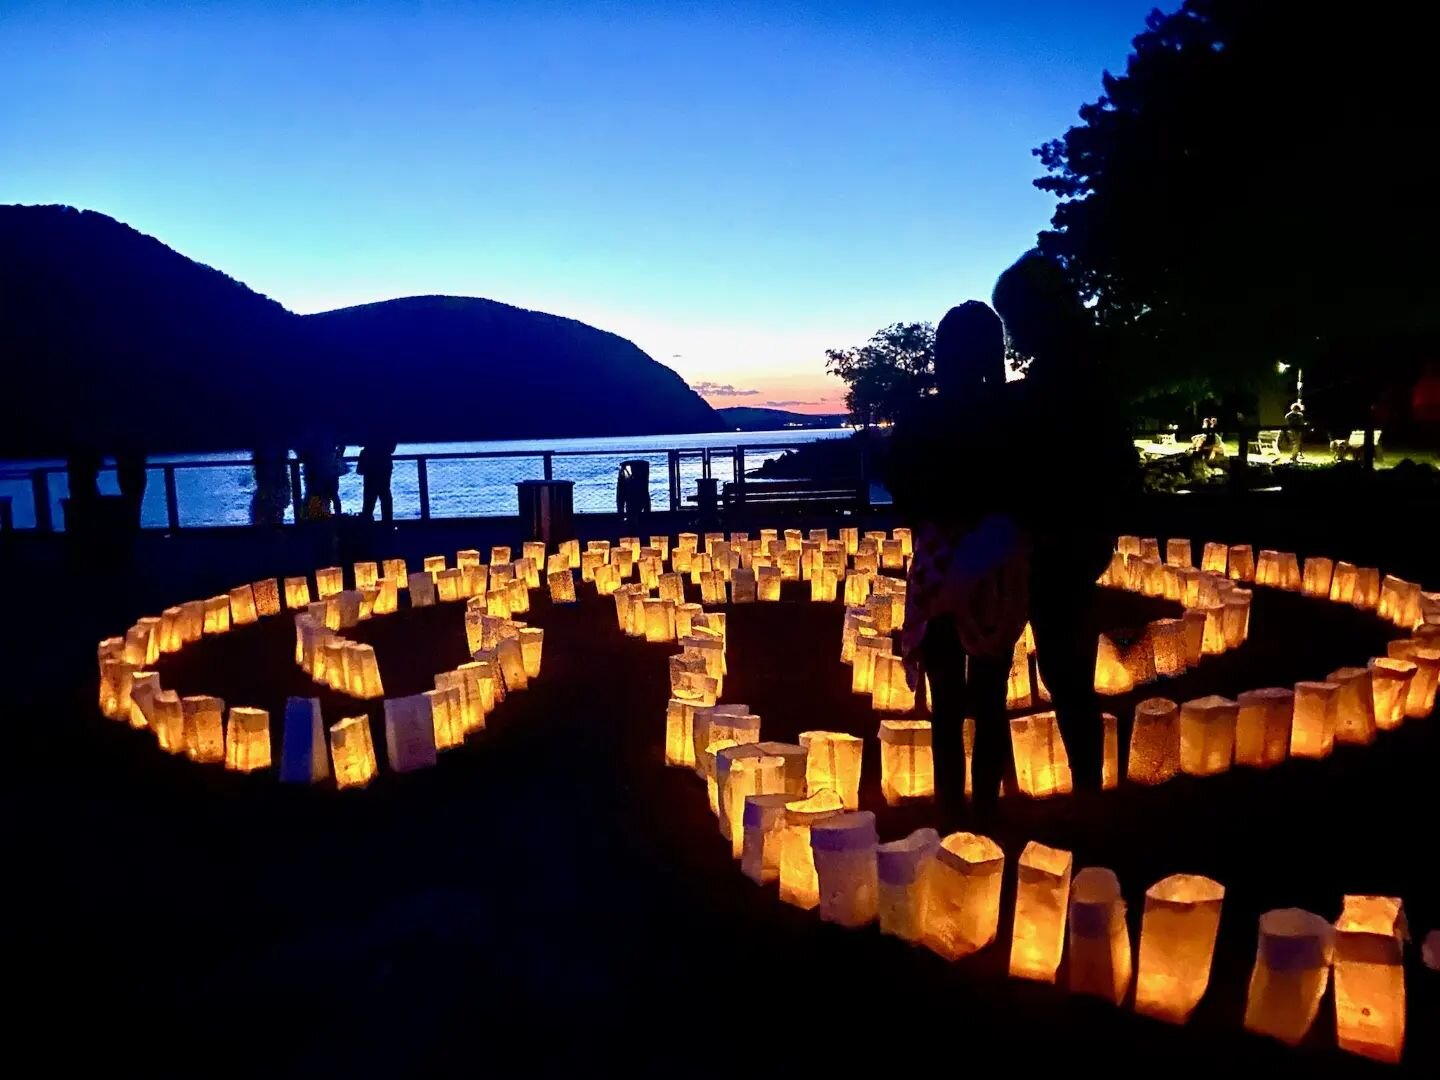 Thank you to everyone who joined the Hub at our Luminaria event last night, in remembrance of those we have lost to overdose.

To anyone struggling with substance use disorder, the Hub is here to help.

Special thanks to our Hub staff, the team @hvpa